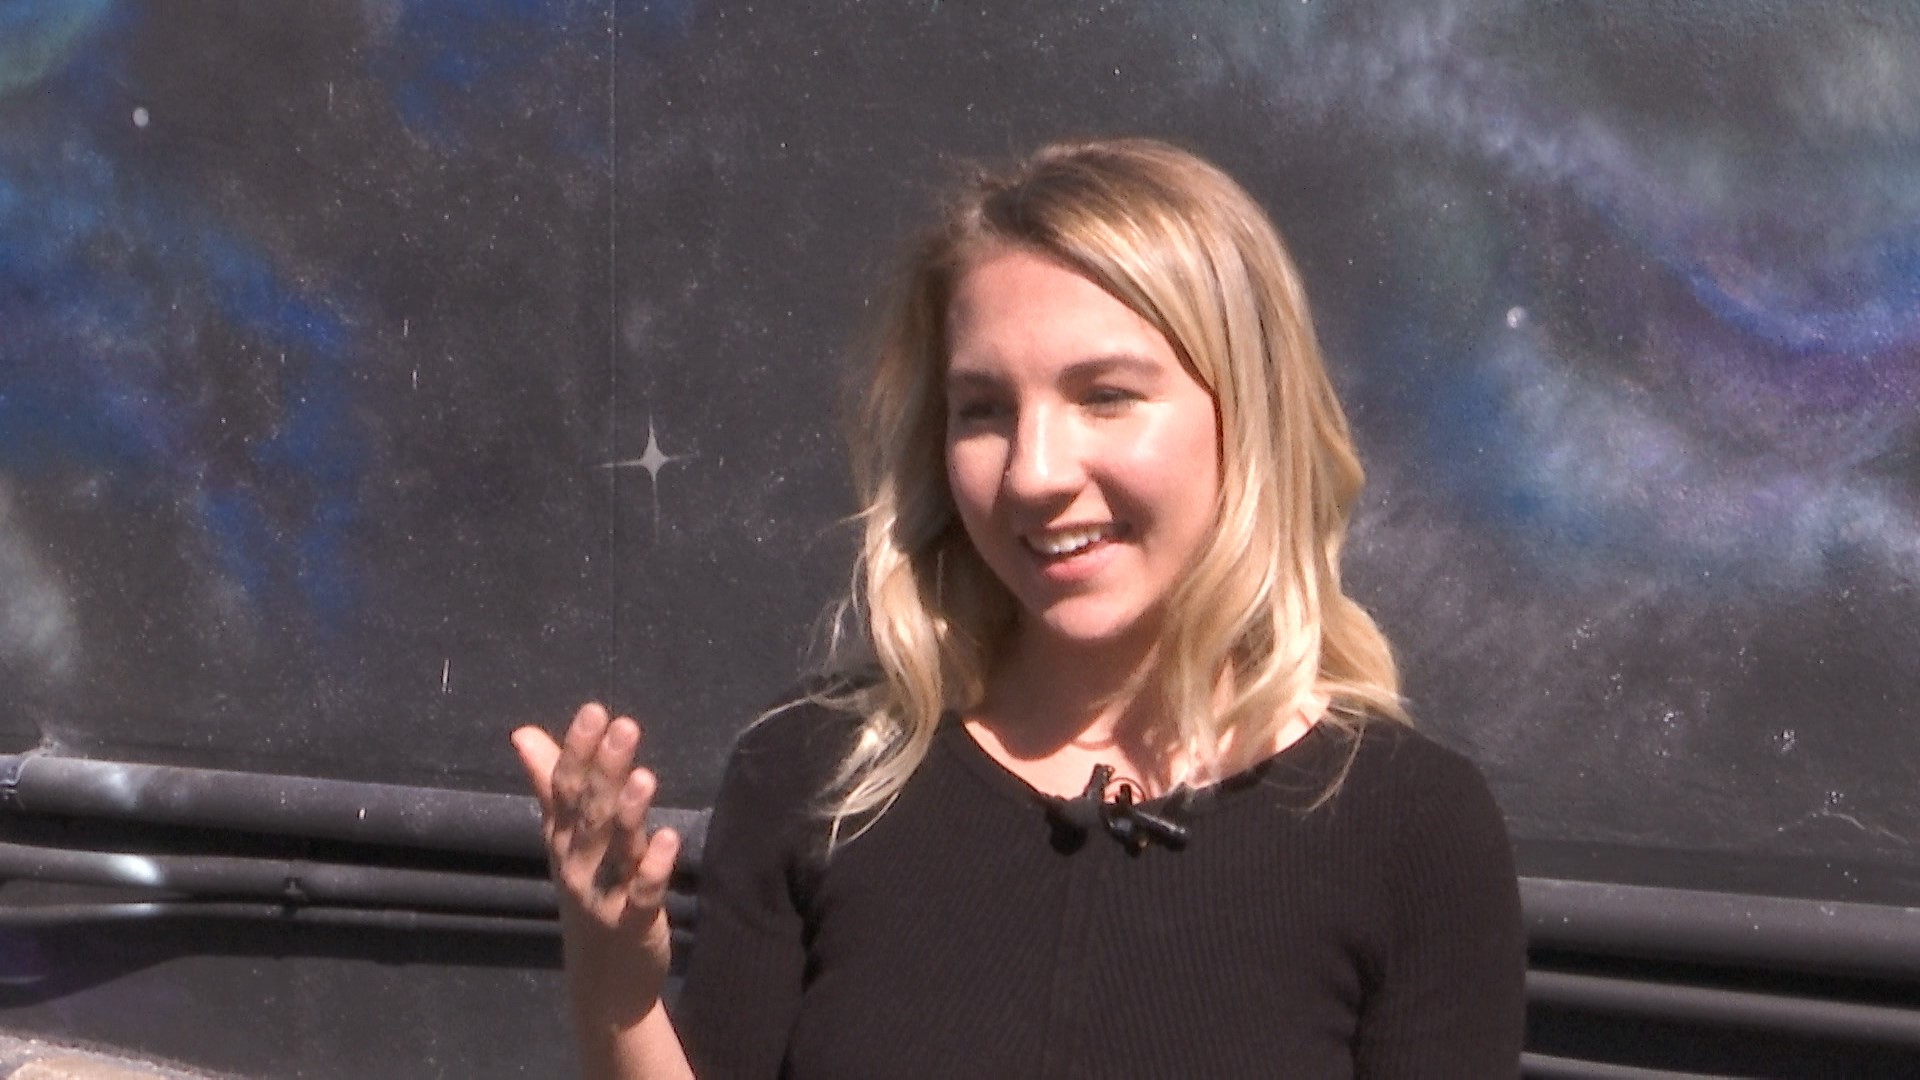 Artist Jessie Andrews says the wind caused her problems when painting the mural, but it also added to the piece.